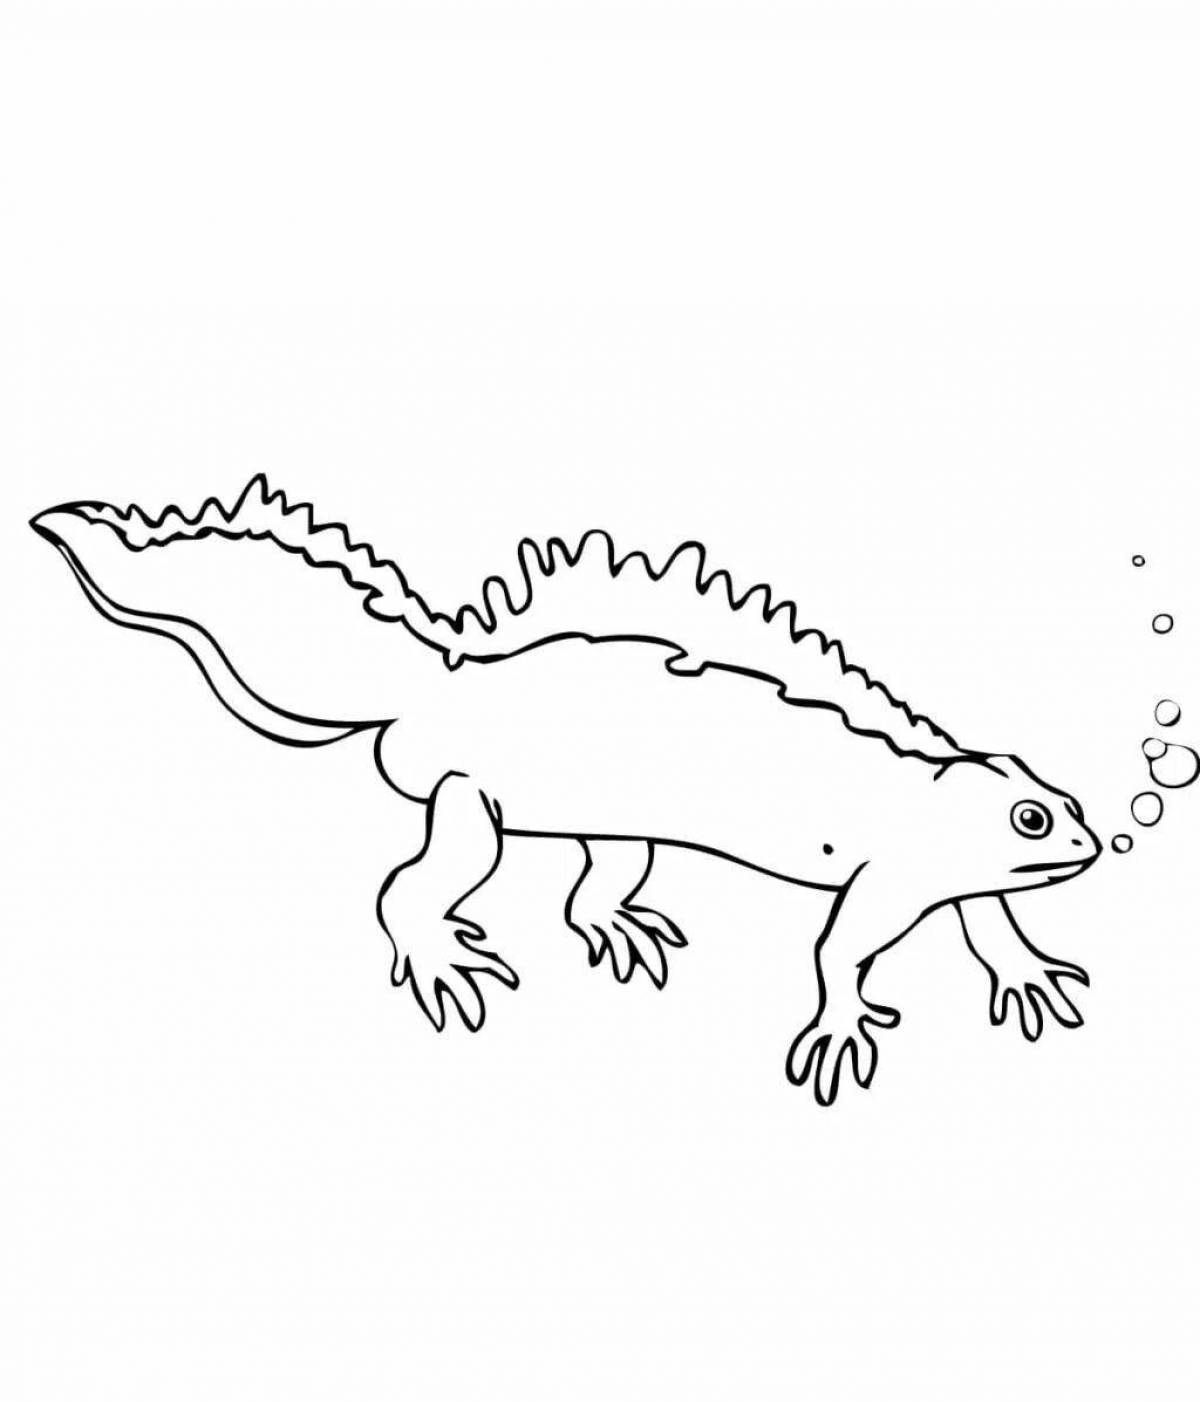 Coloring page of the cheeky common newt